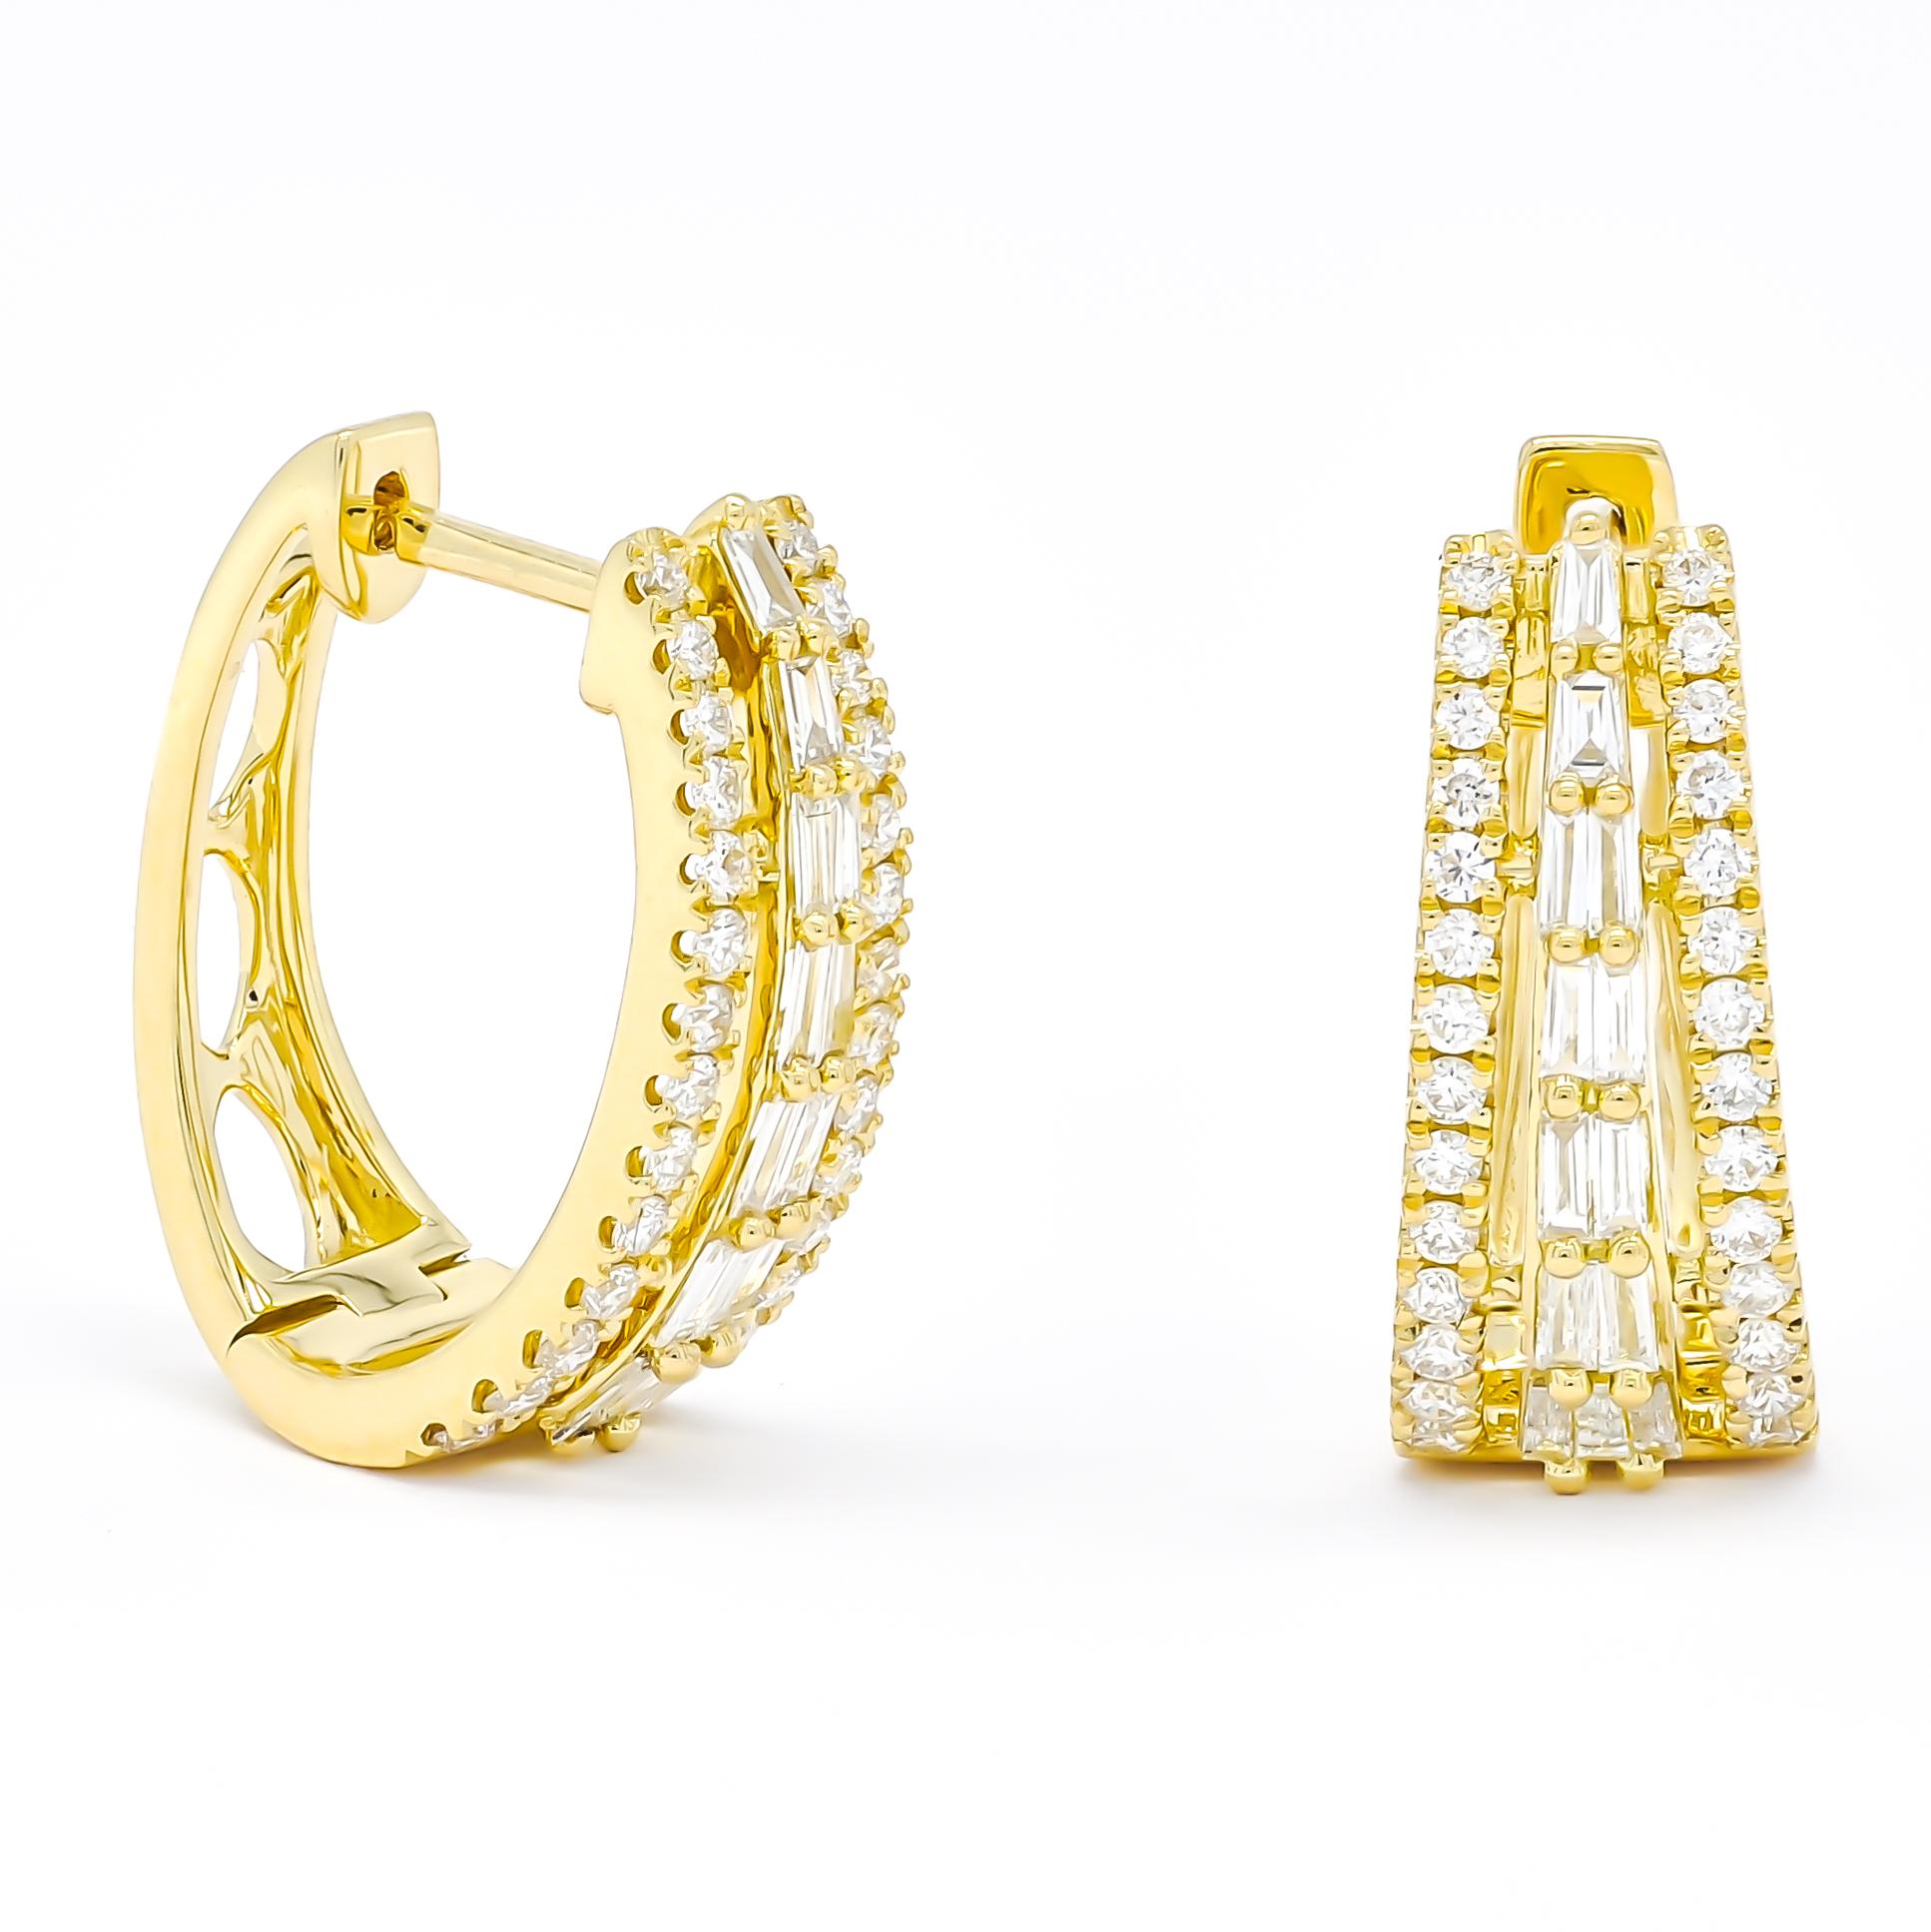 Elevate your style with sophistication and grace wearing these exquisite hoop earrings, adorned with brilliant baguette and shimmering round-cut diamonds set in gleaming 18 KT Yellow Gold.

Totaling 0.76 carats, the diamonds in these designer hoops